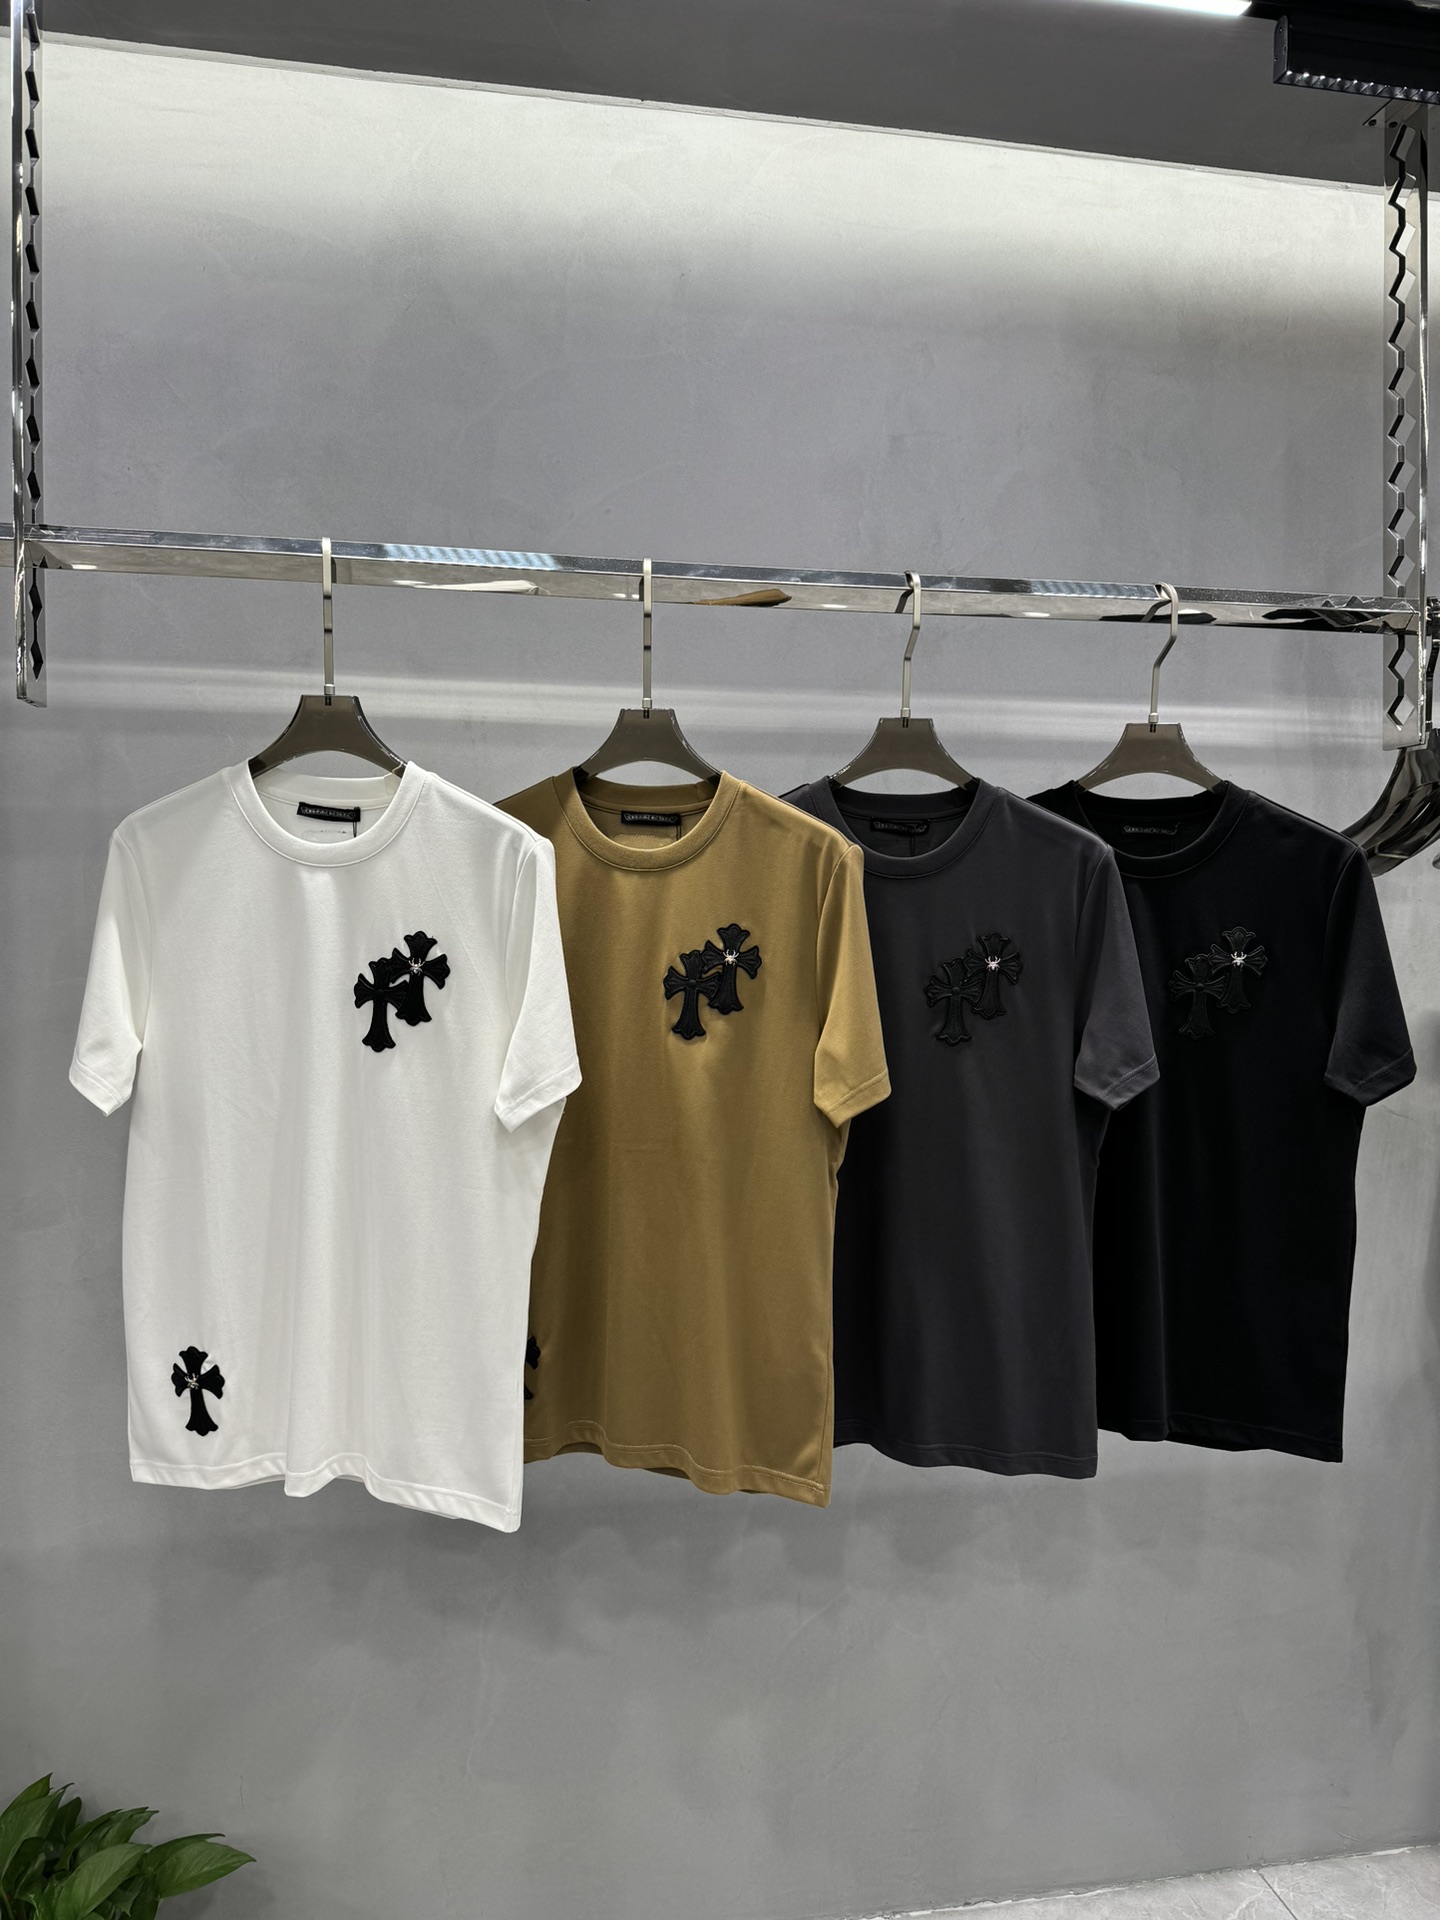 Chrome Hearts Clothing T-Shirt Black Grey Khaki Red White Cotton Spring/Summer Collection Short Sleeve